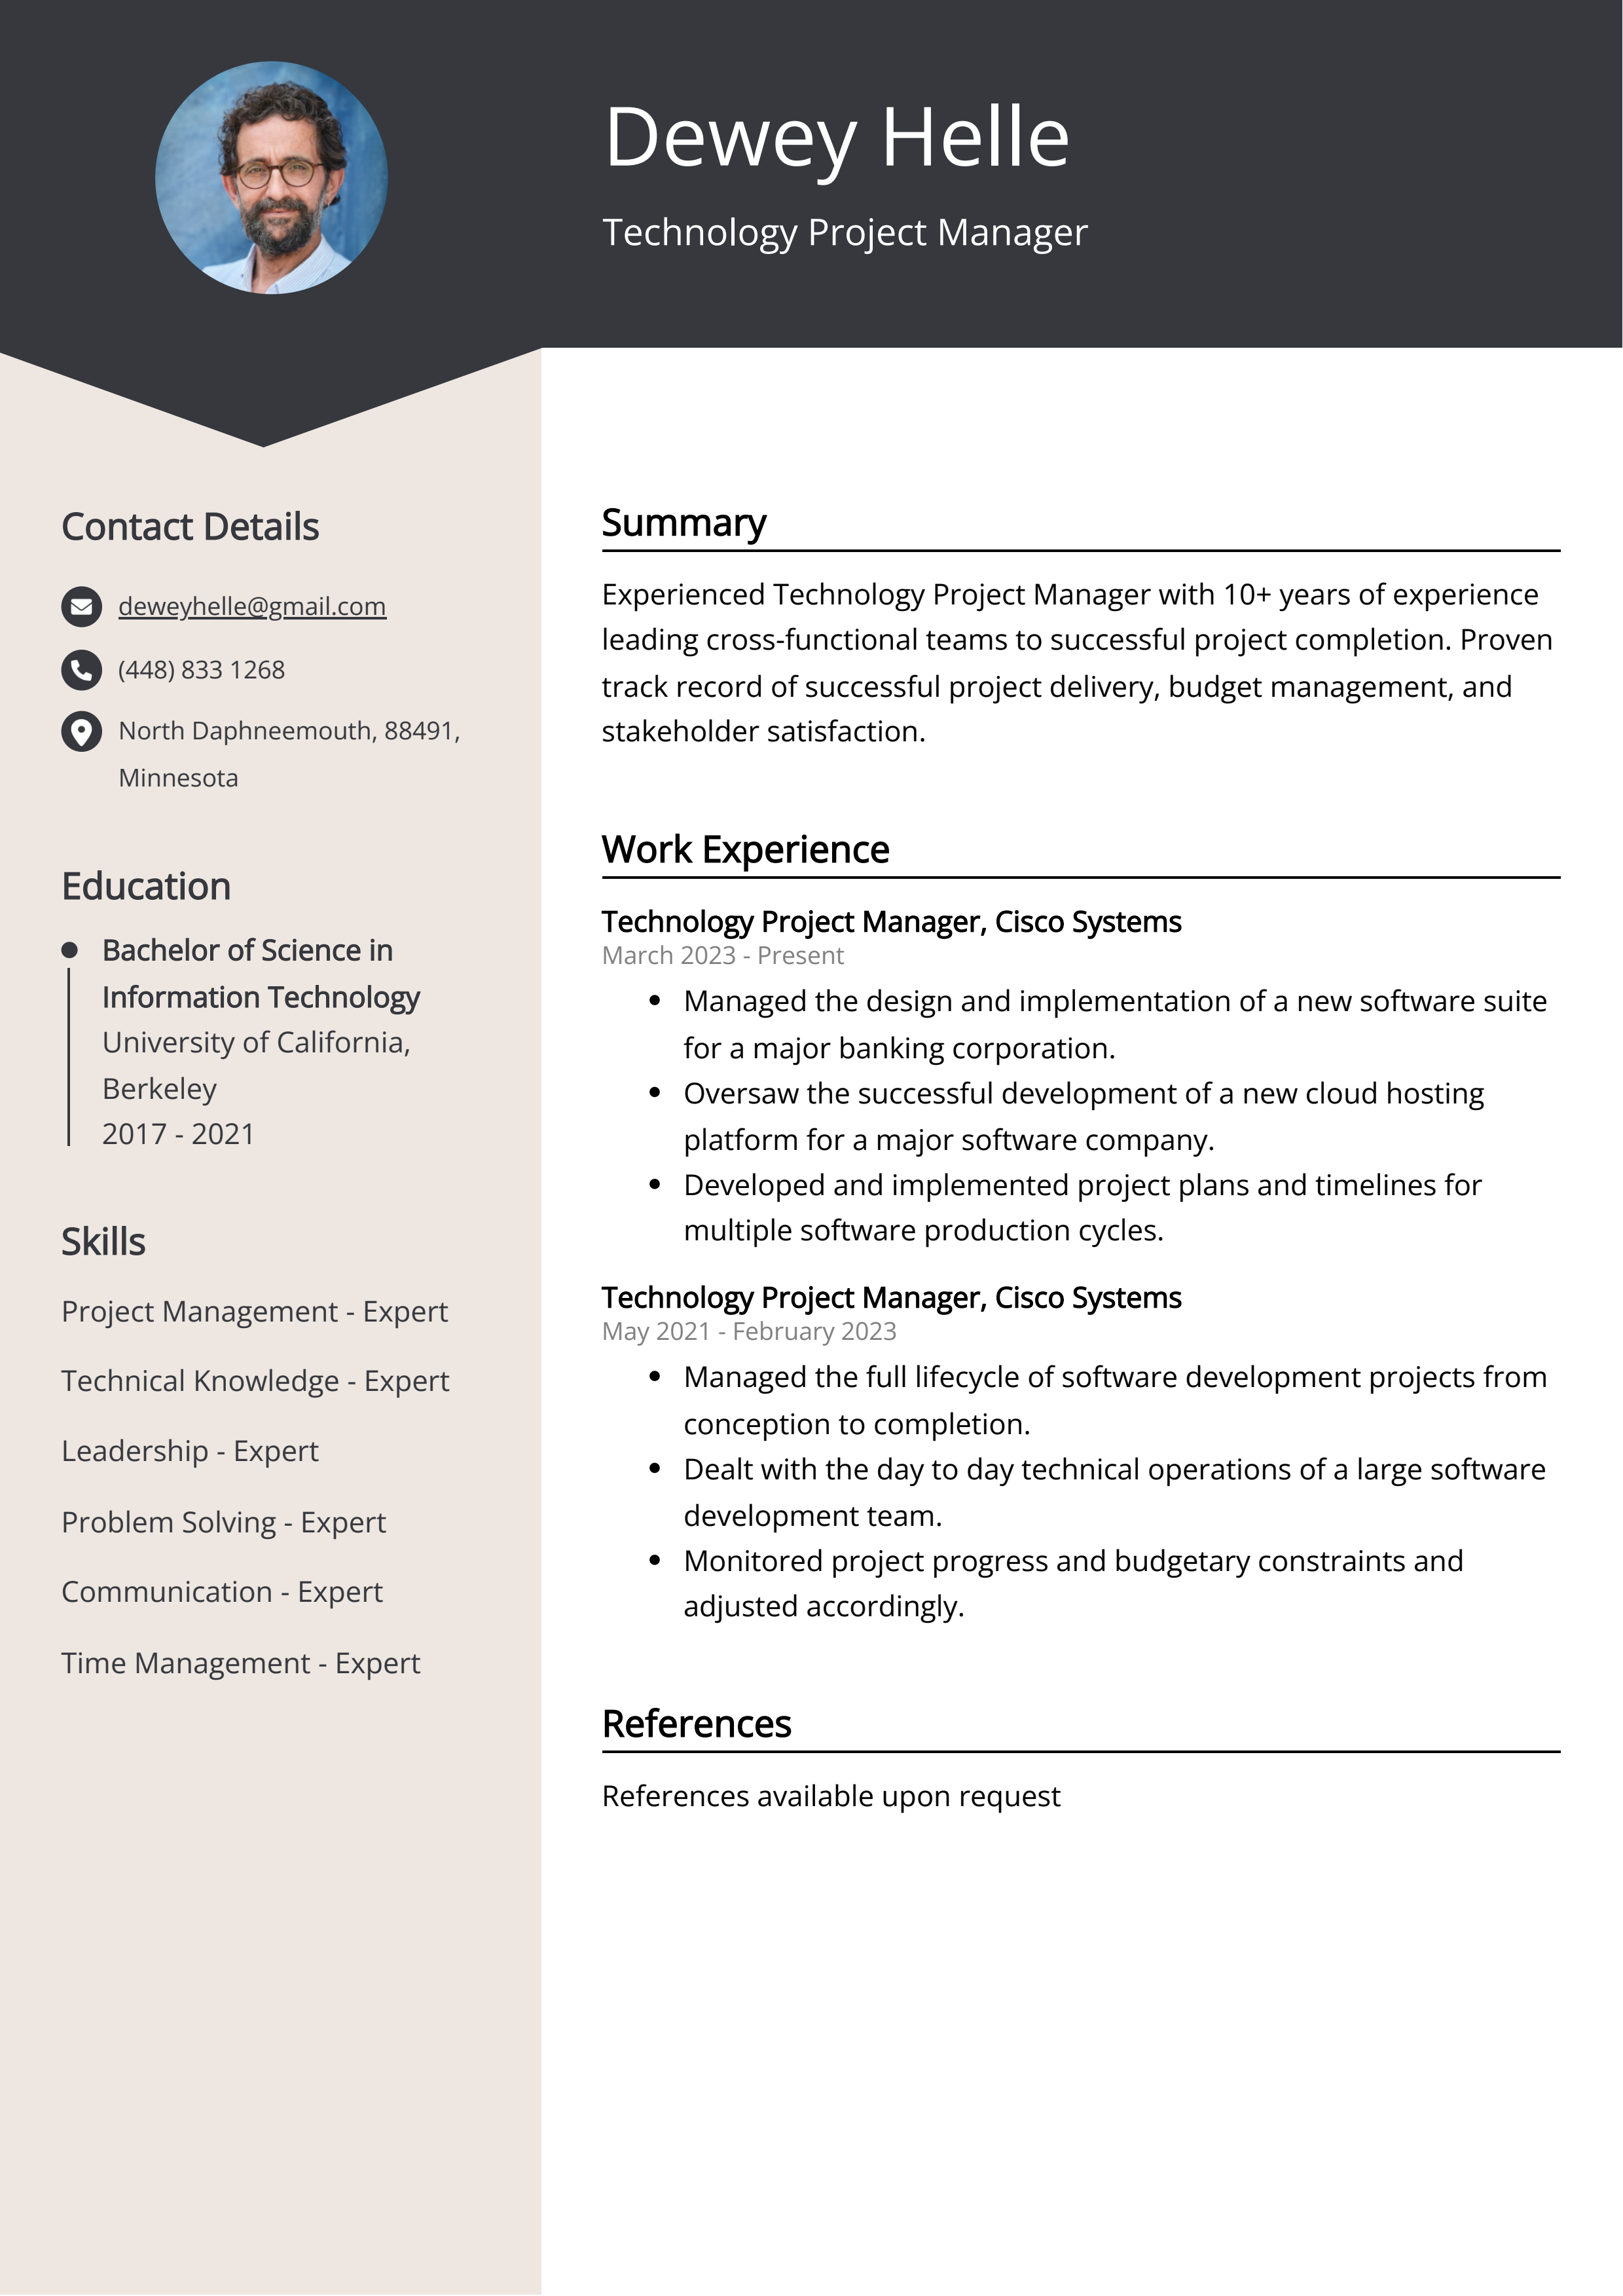 Technology Project Manager CV Example